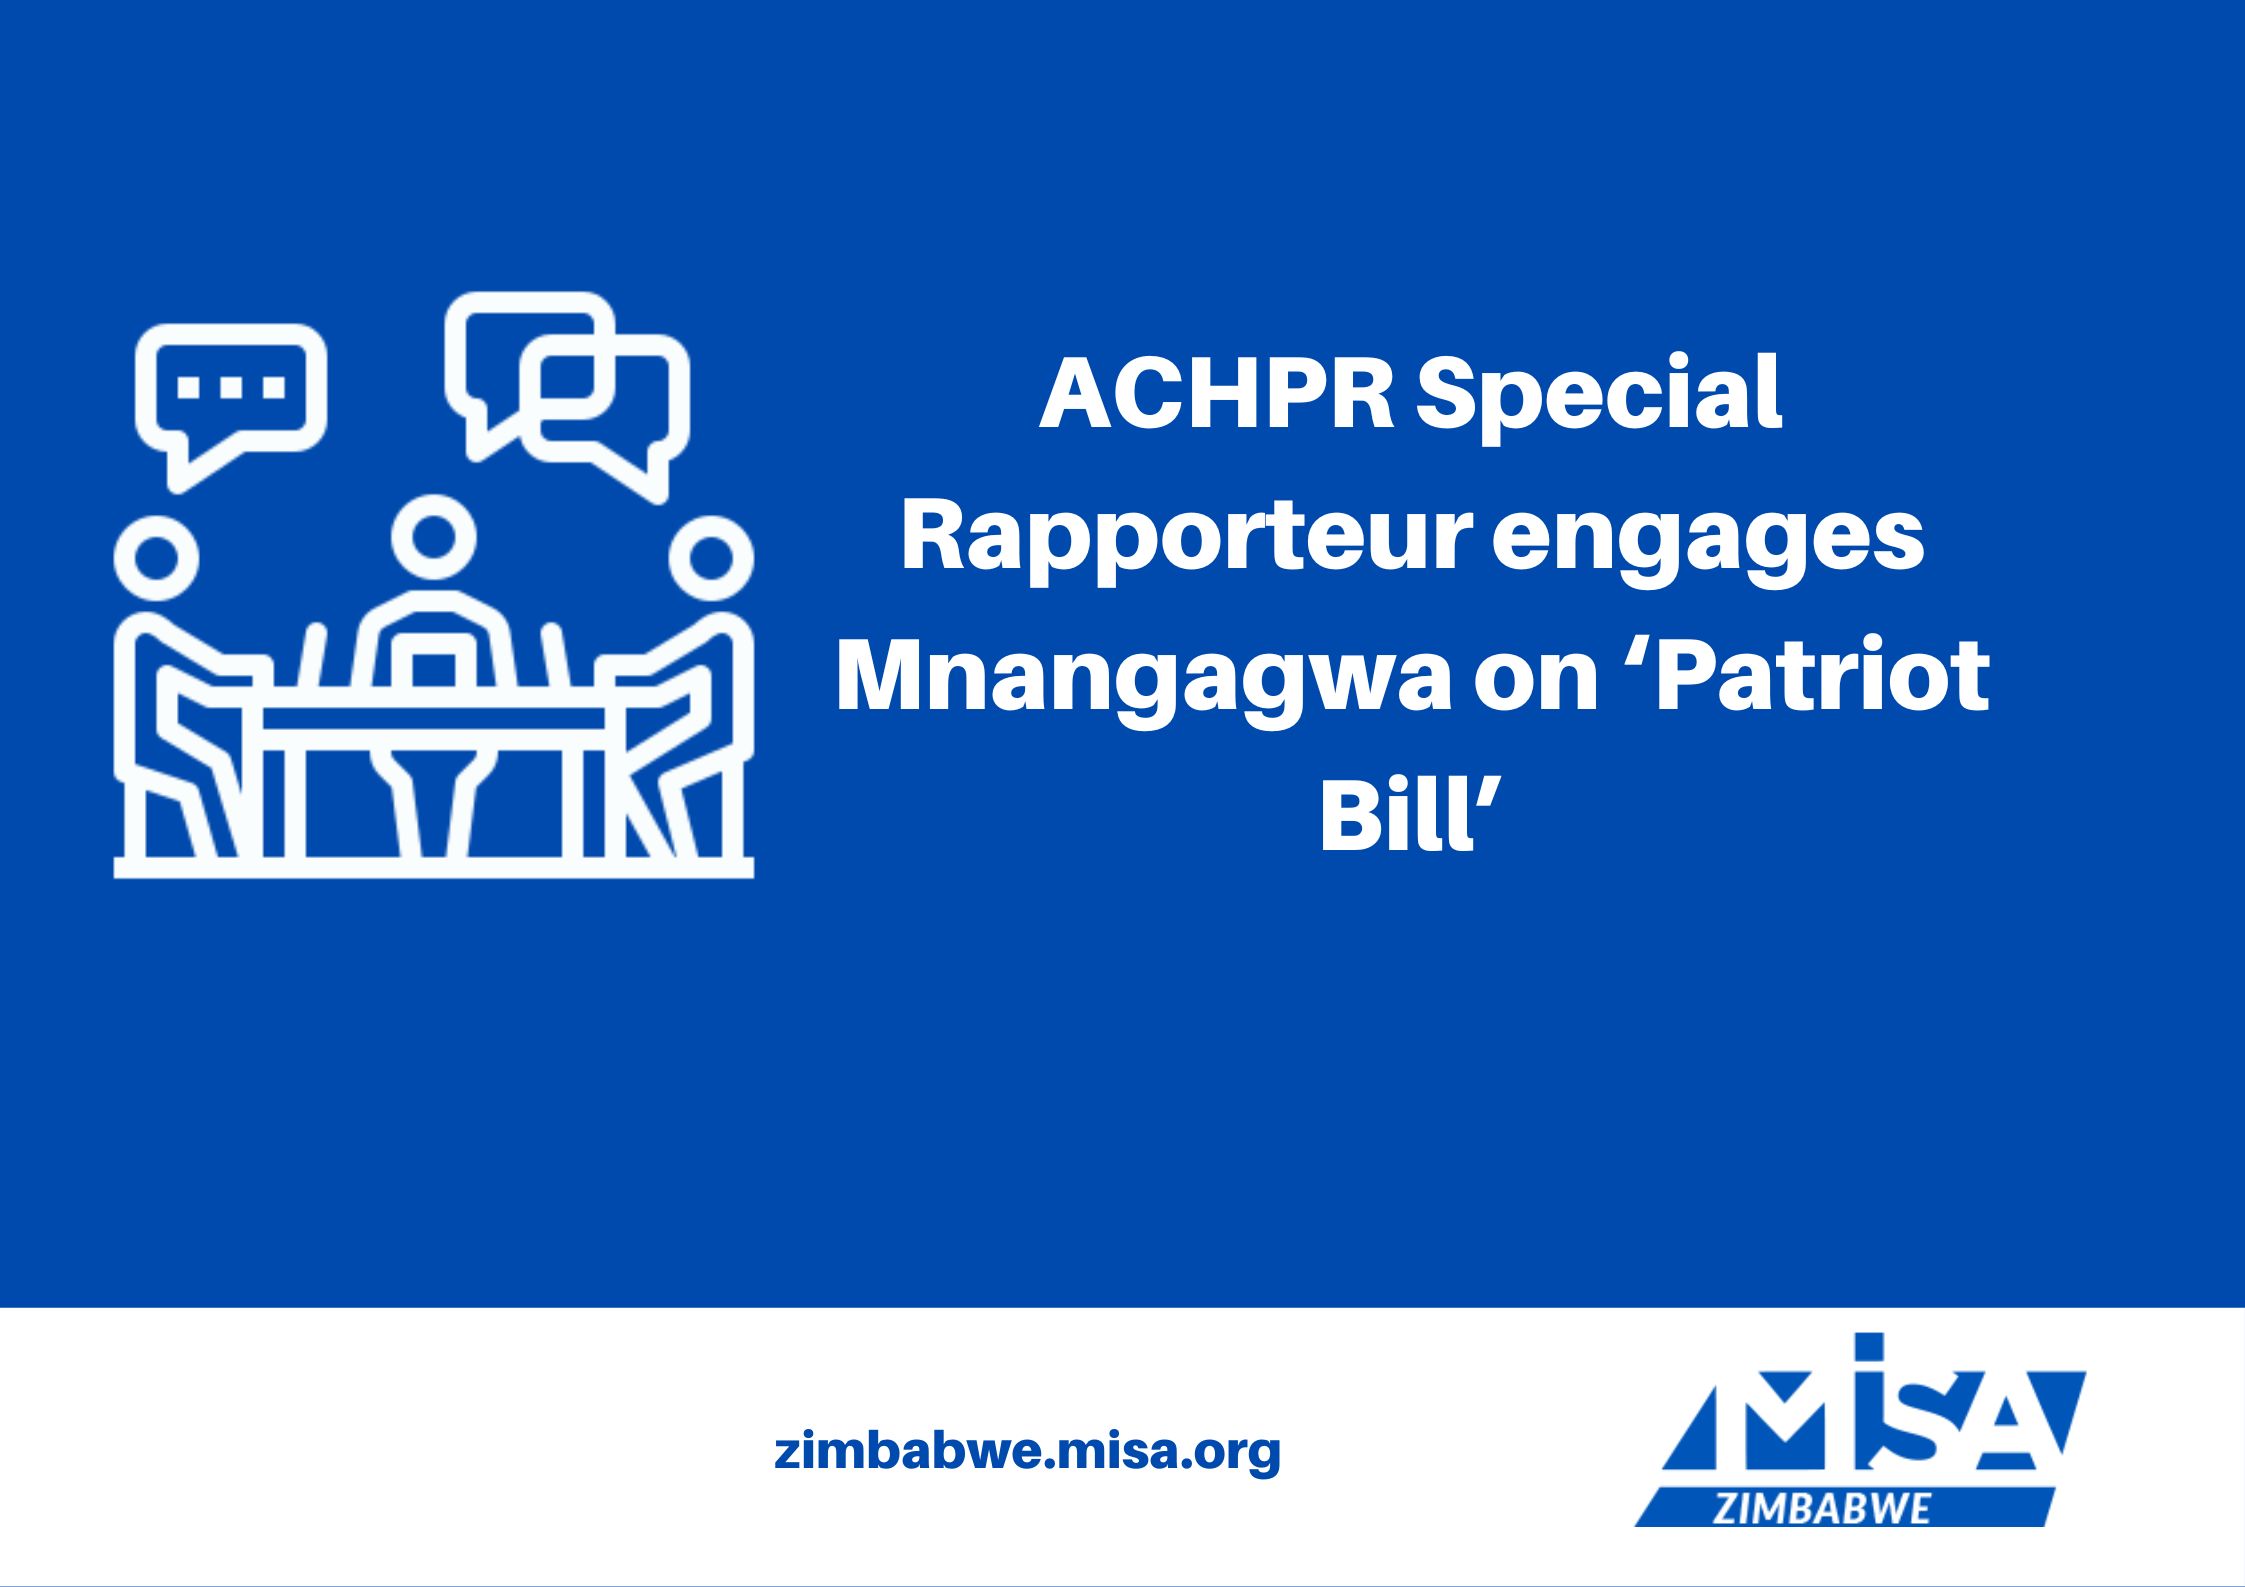 ACHPR Special Rapporteur engages Mnangagwa on ‘Patriot Bill’